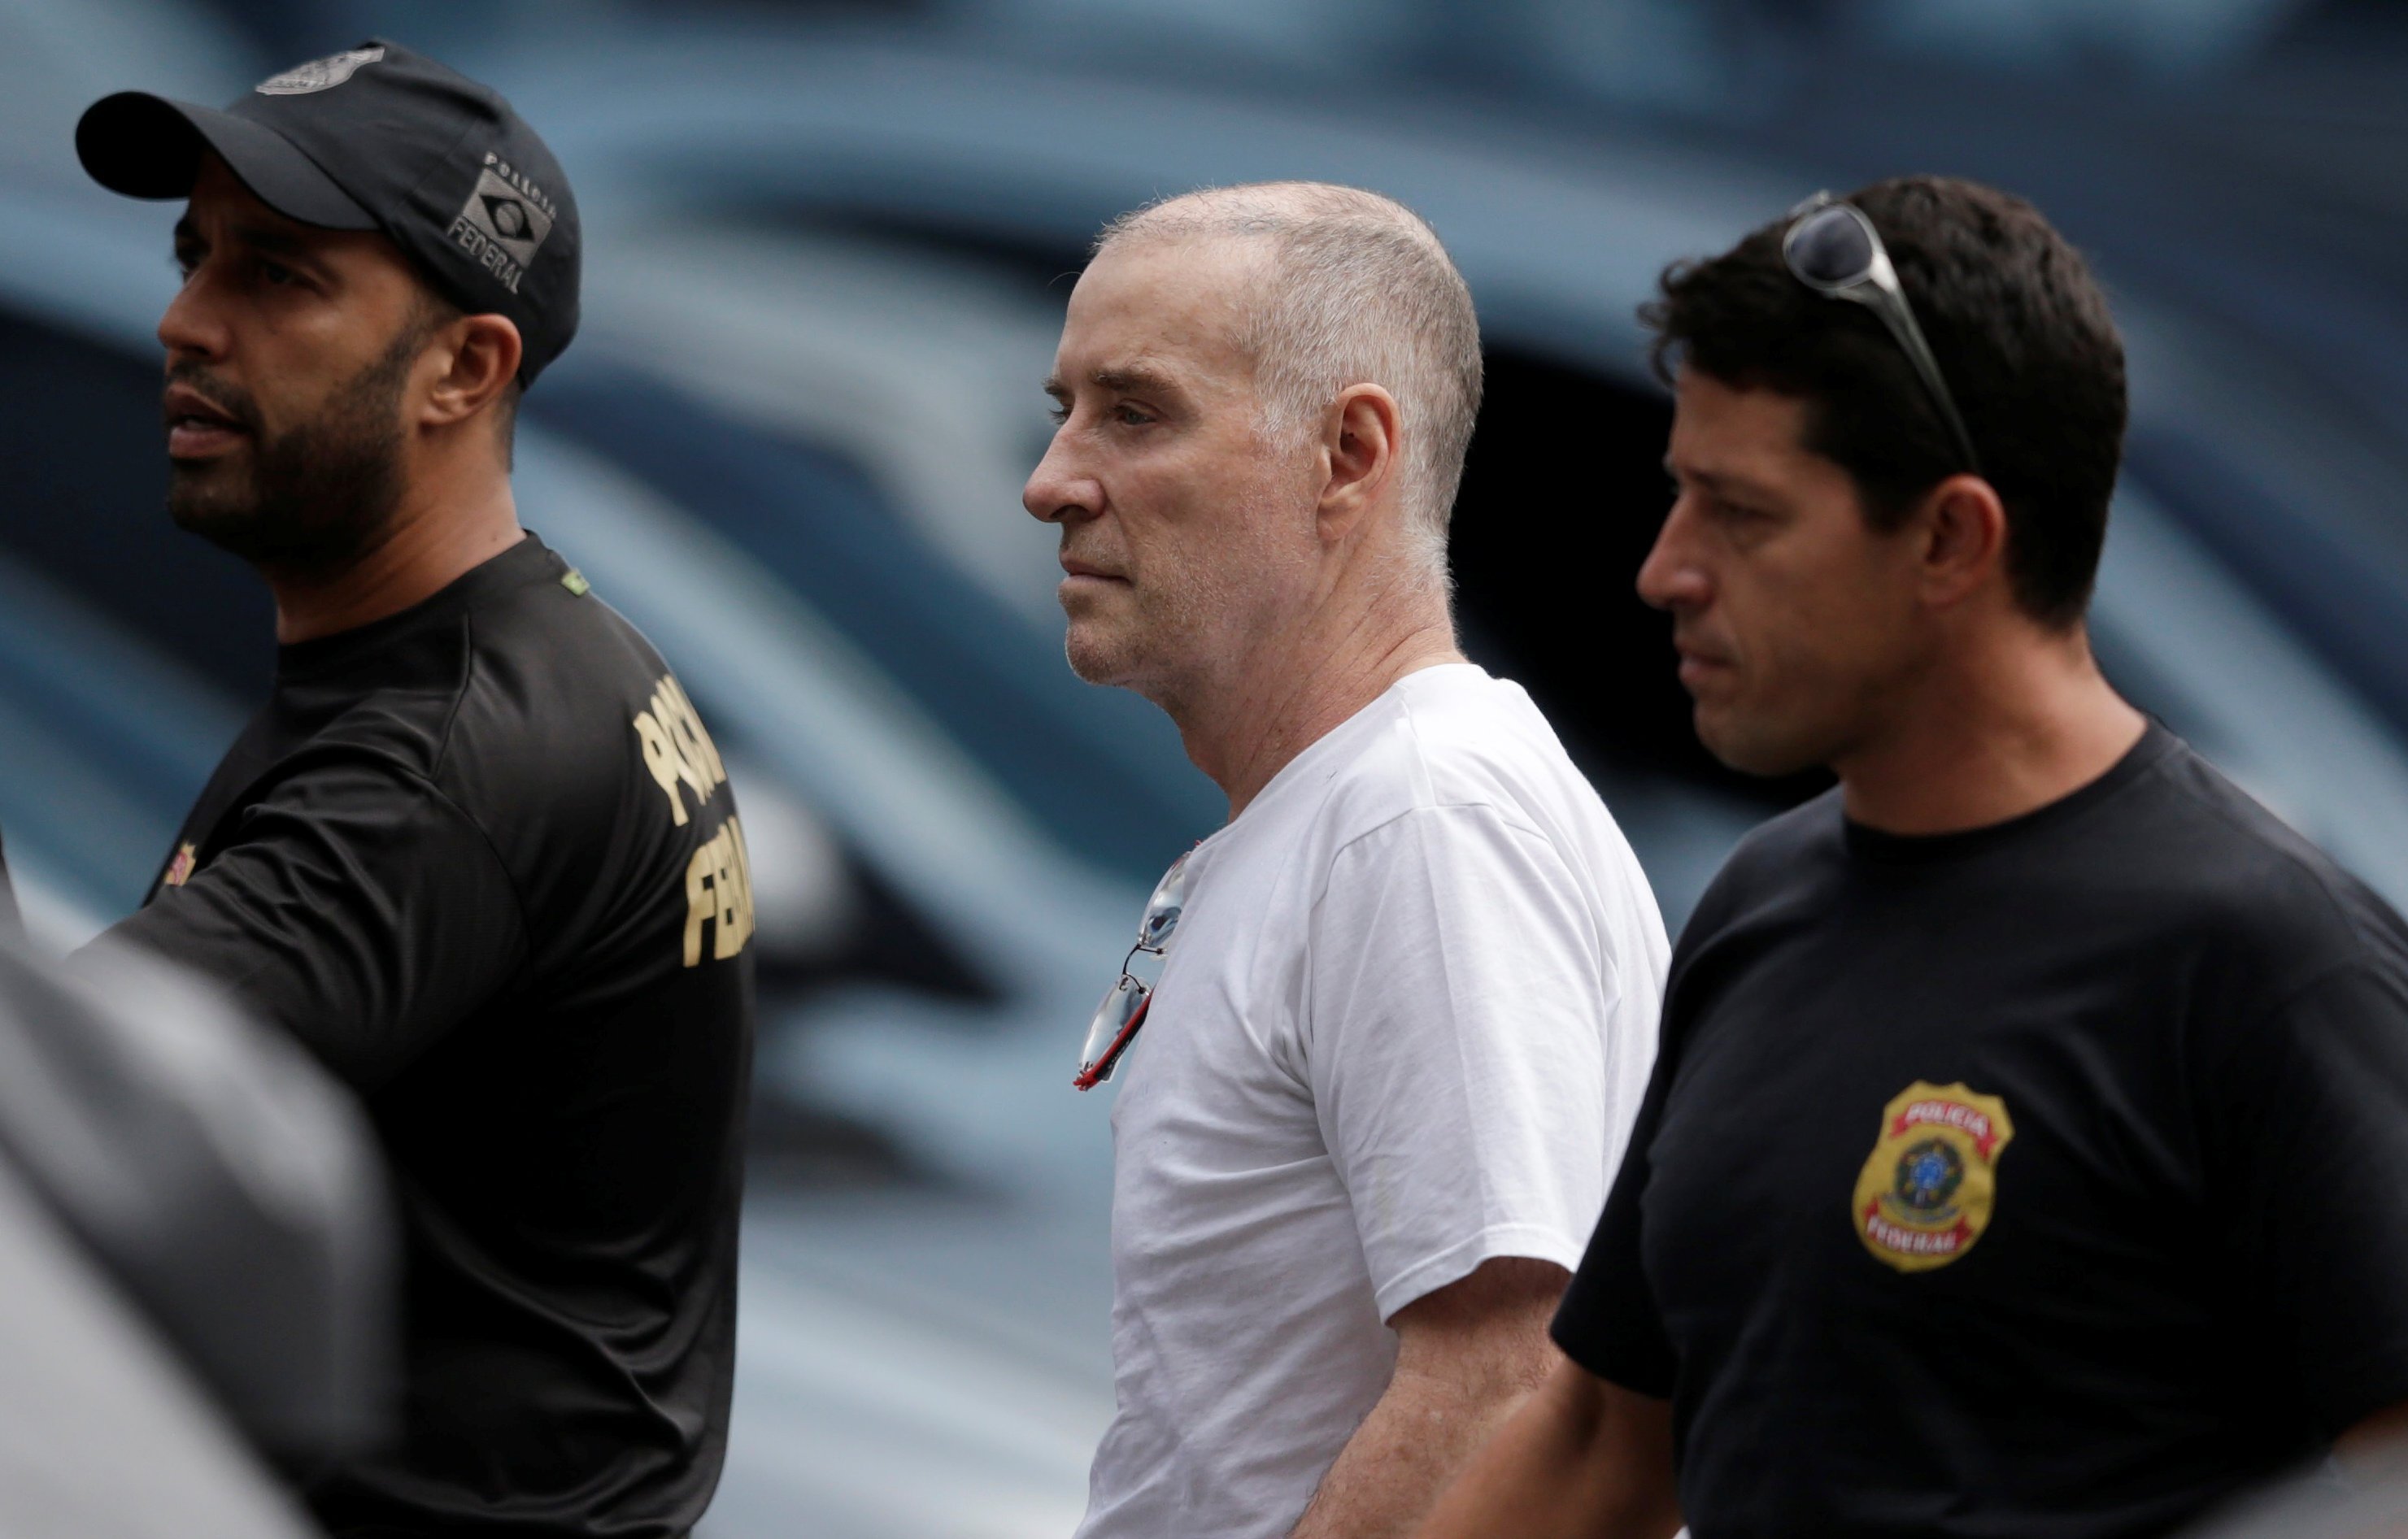 Former billionaire Eike Batista arrives at the Federal Police headquarters to give a testimony in Rio de Janeiro